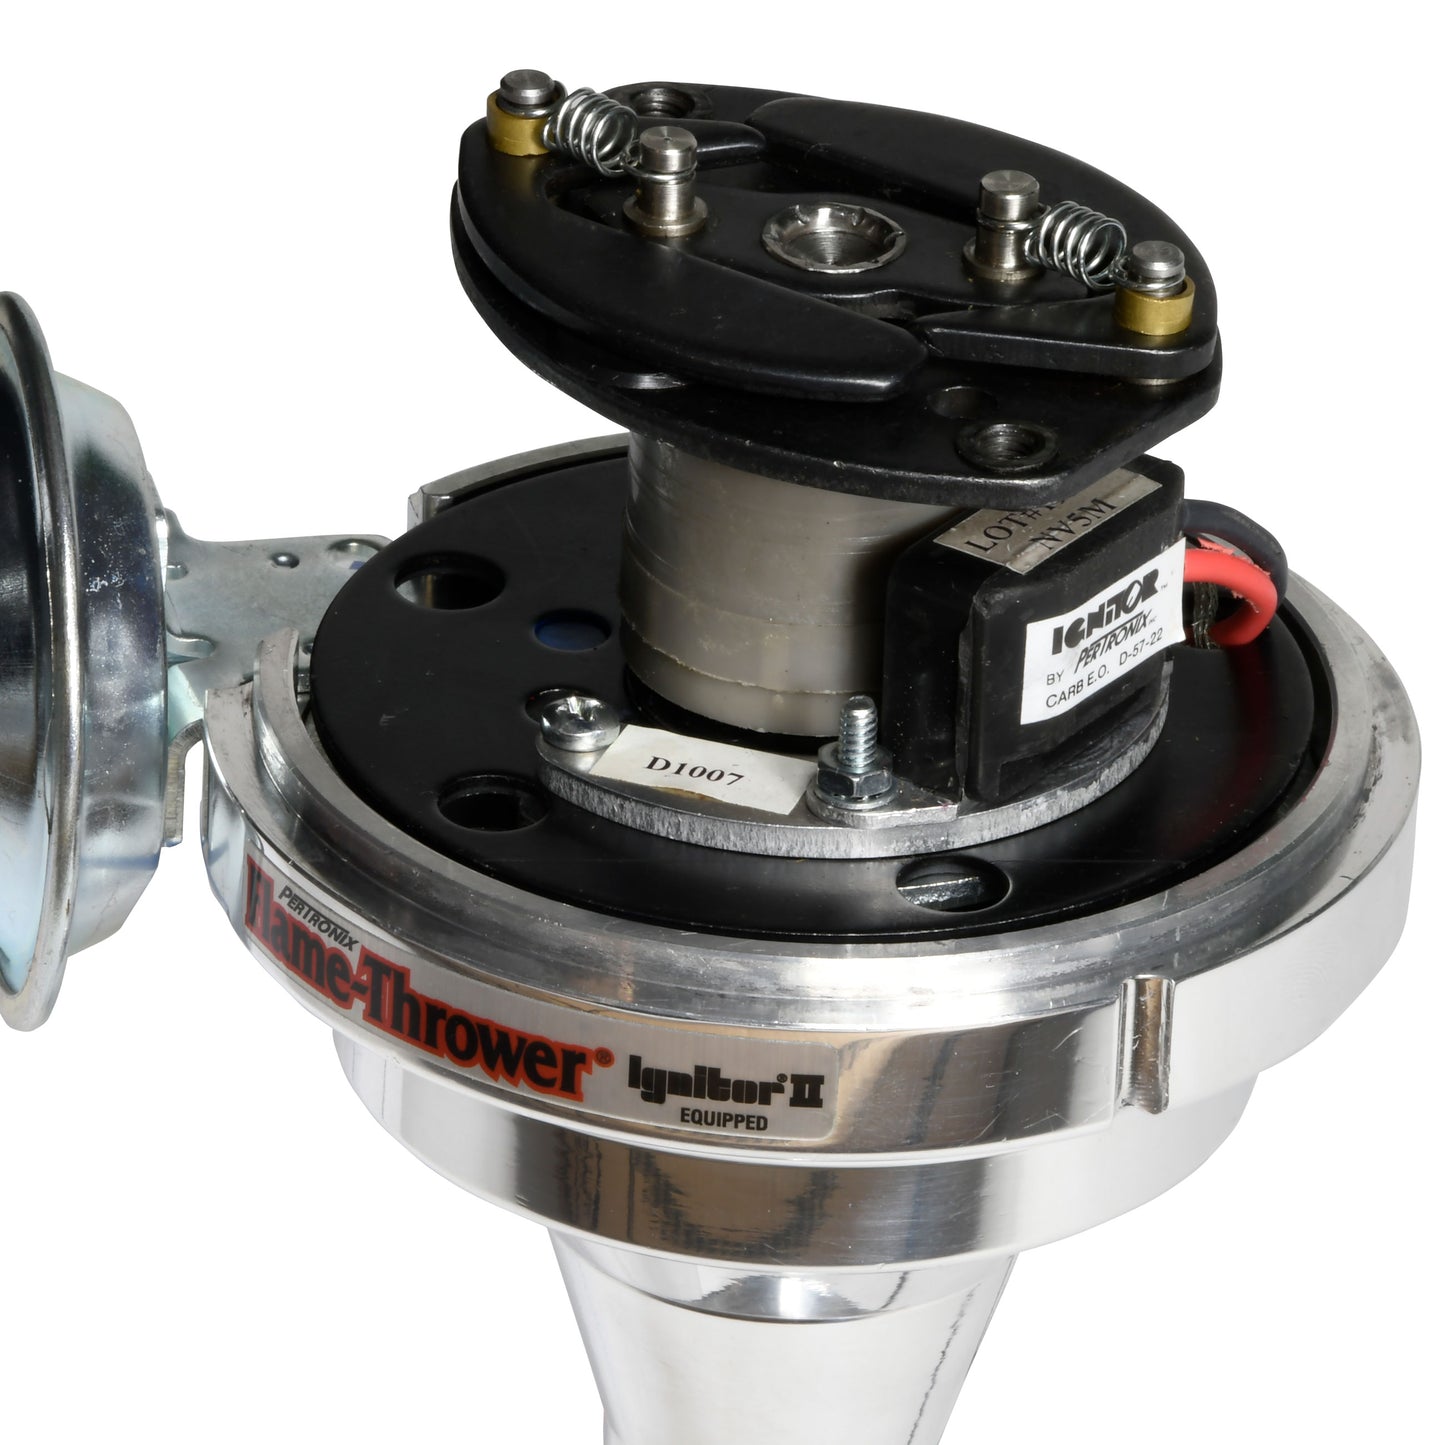 PerTronix Flame Thrower D152700 Billet Distributor with Ignitor II Buick